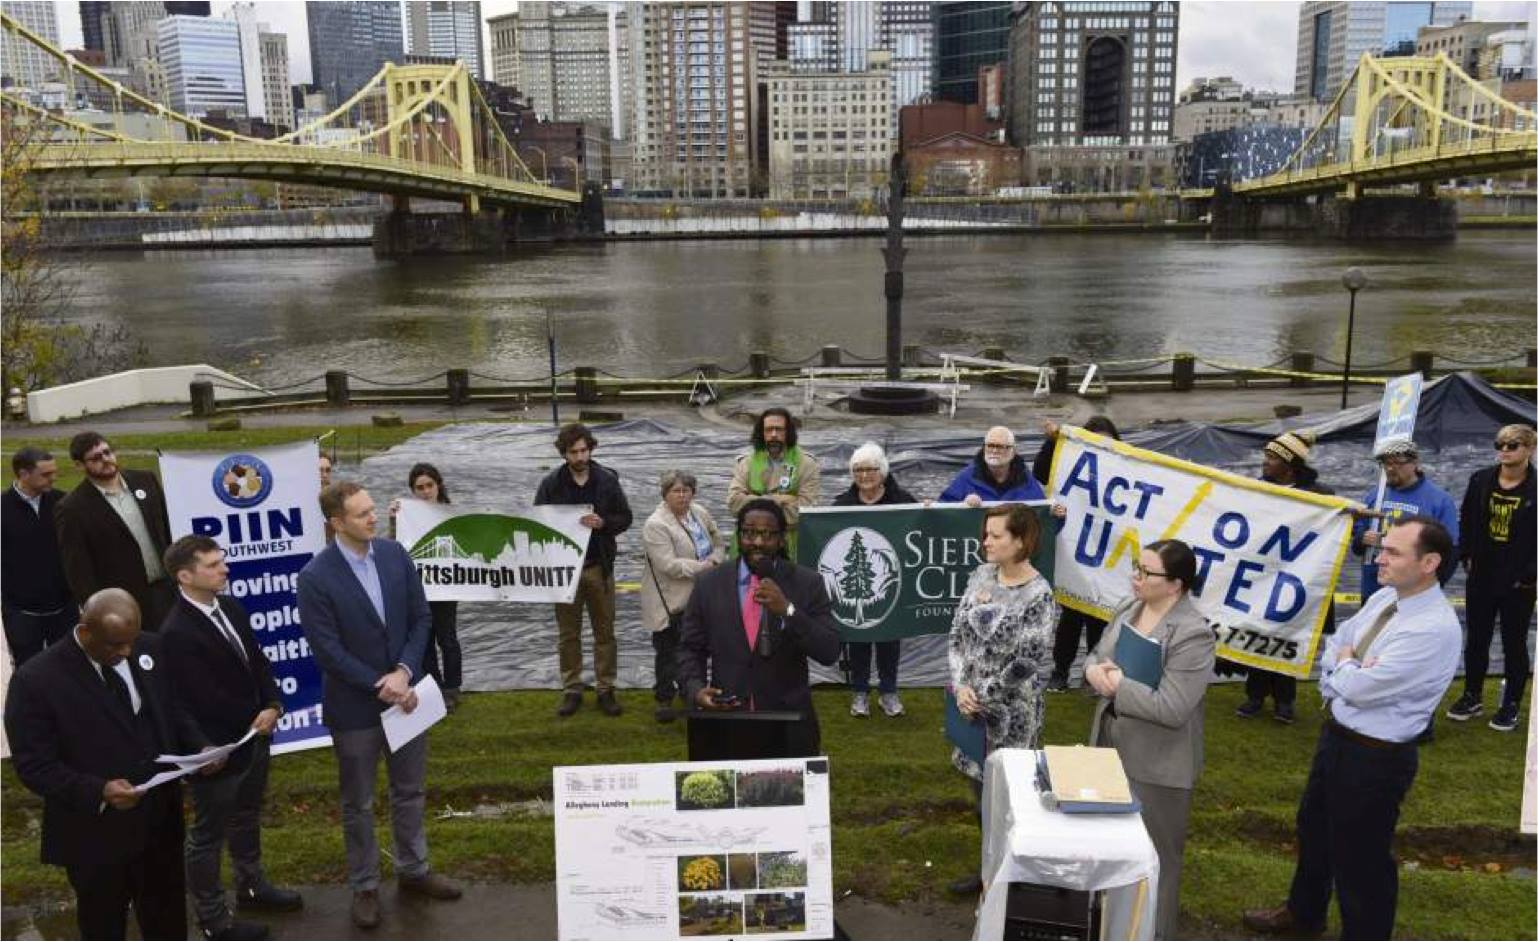 A crowd gathers around a speaker in support of clean rivers, with two yellow bridges over the Allegheny River in the background.